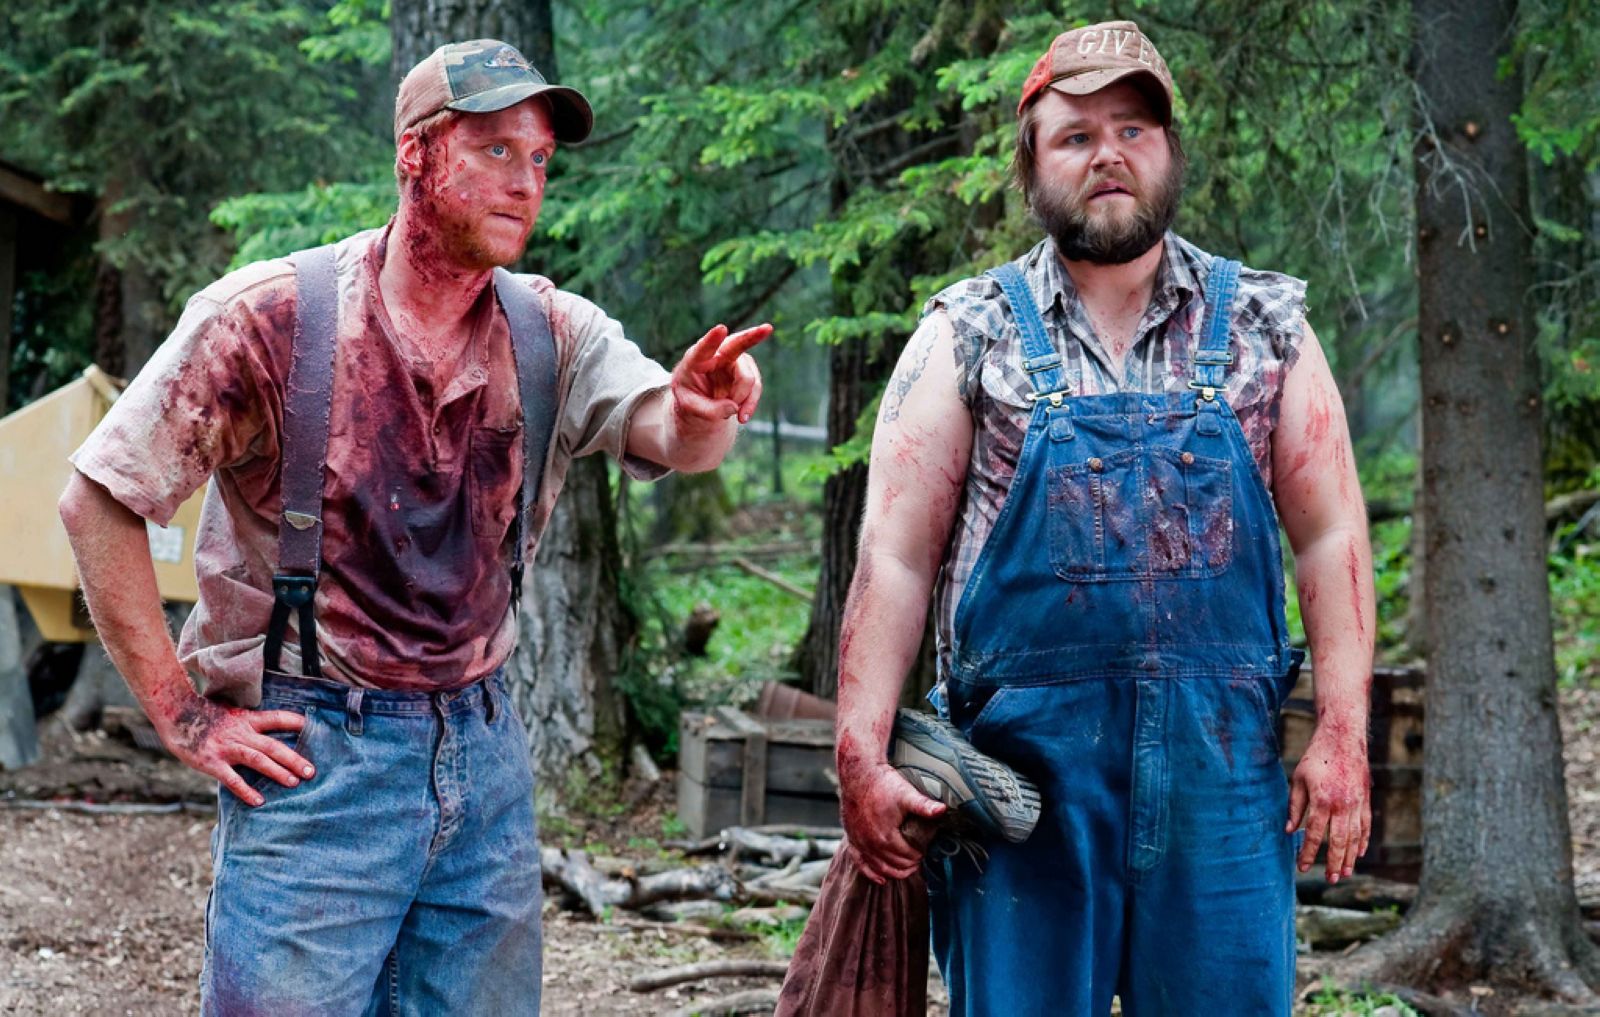 Tucker and Dale